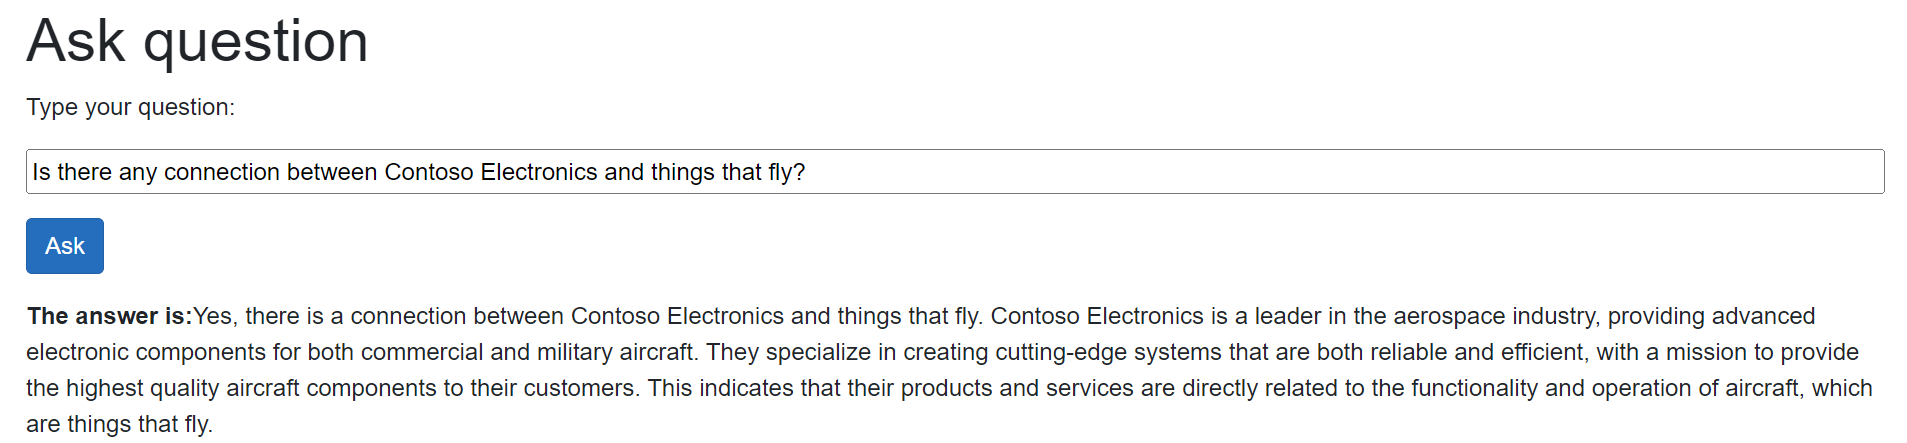 Is there any connection between Contoso Electronics and things that fly?